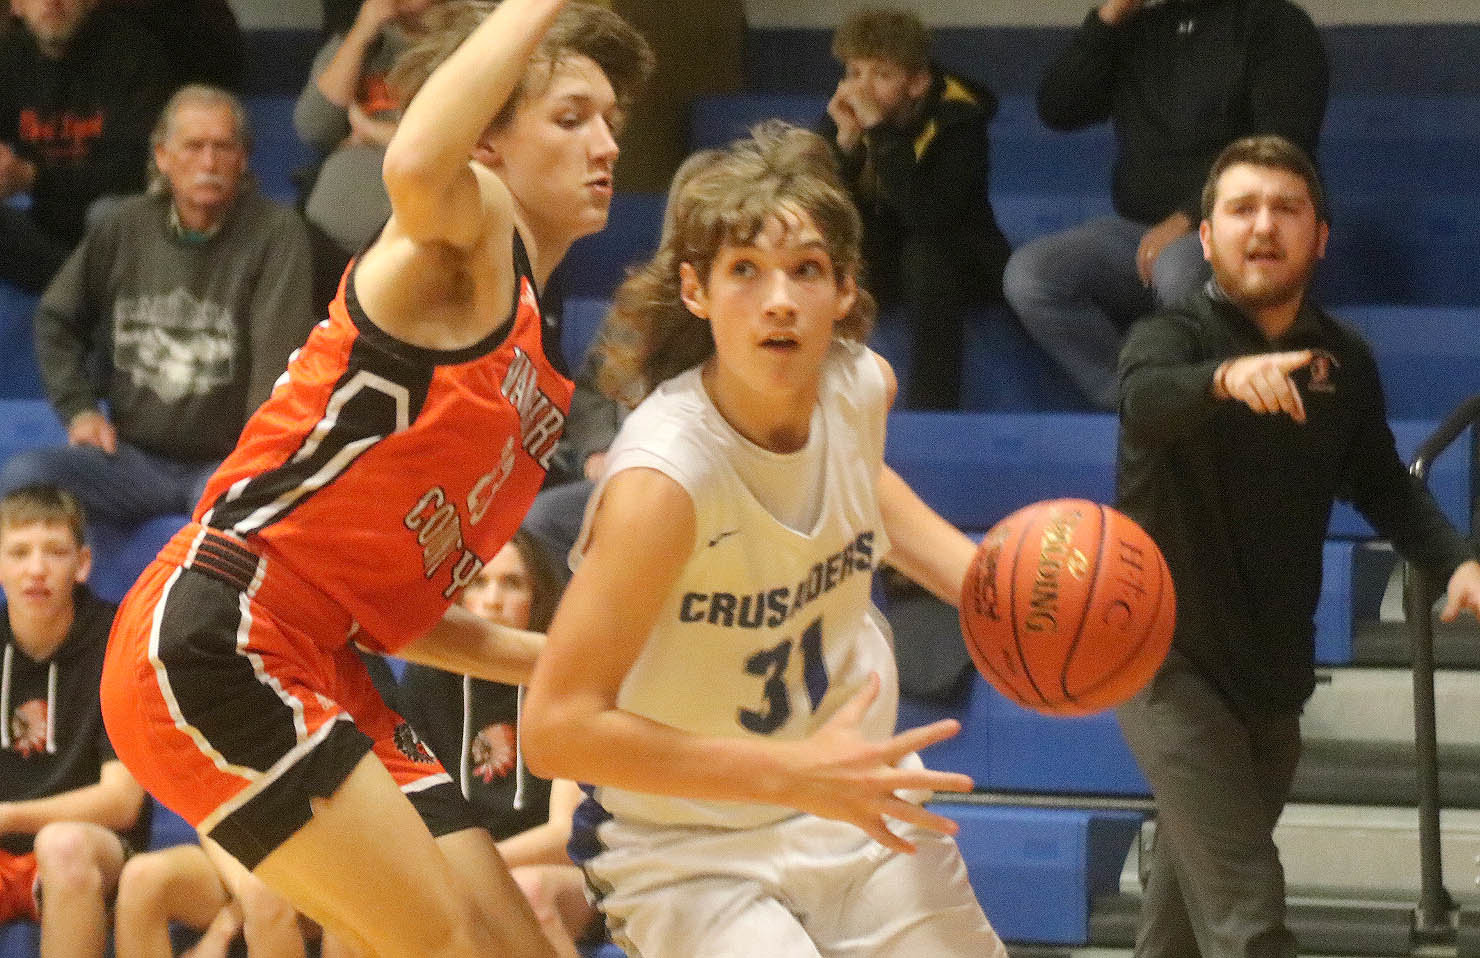 Holy Trinity Catholic freshman Luke Hellige drives in the first quarter of the Crusaders' 44-43 win over Van Buren Tuesday night. Photo by Chuck Vandenberg/PCC